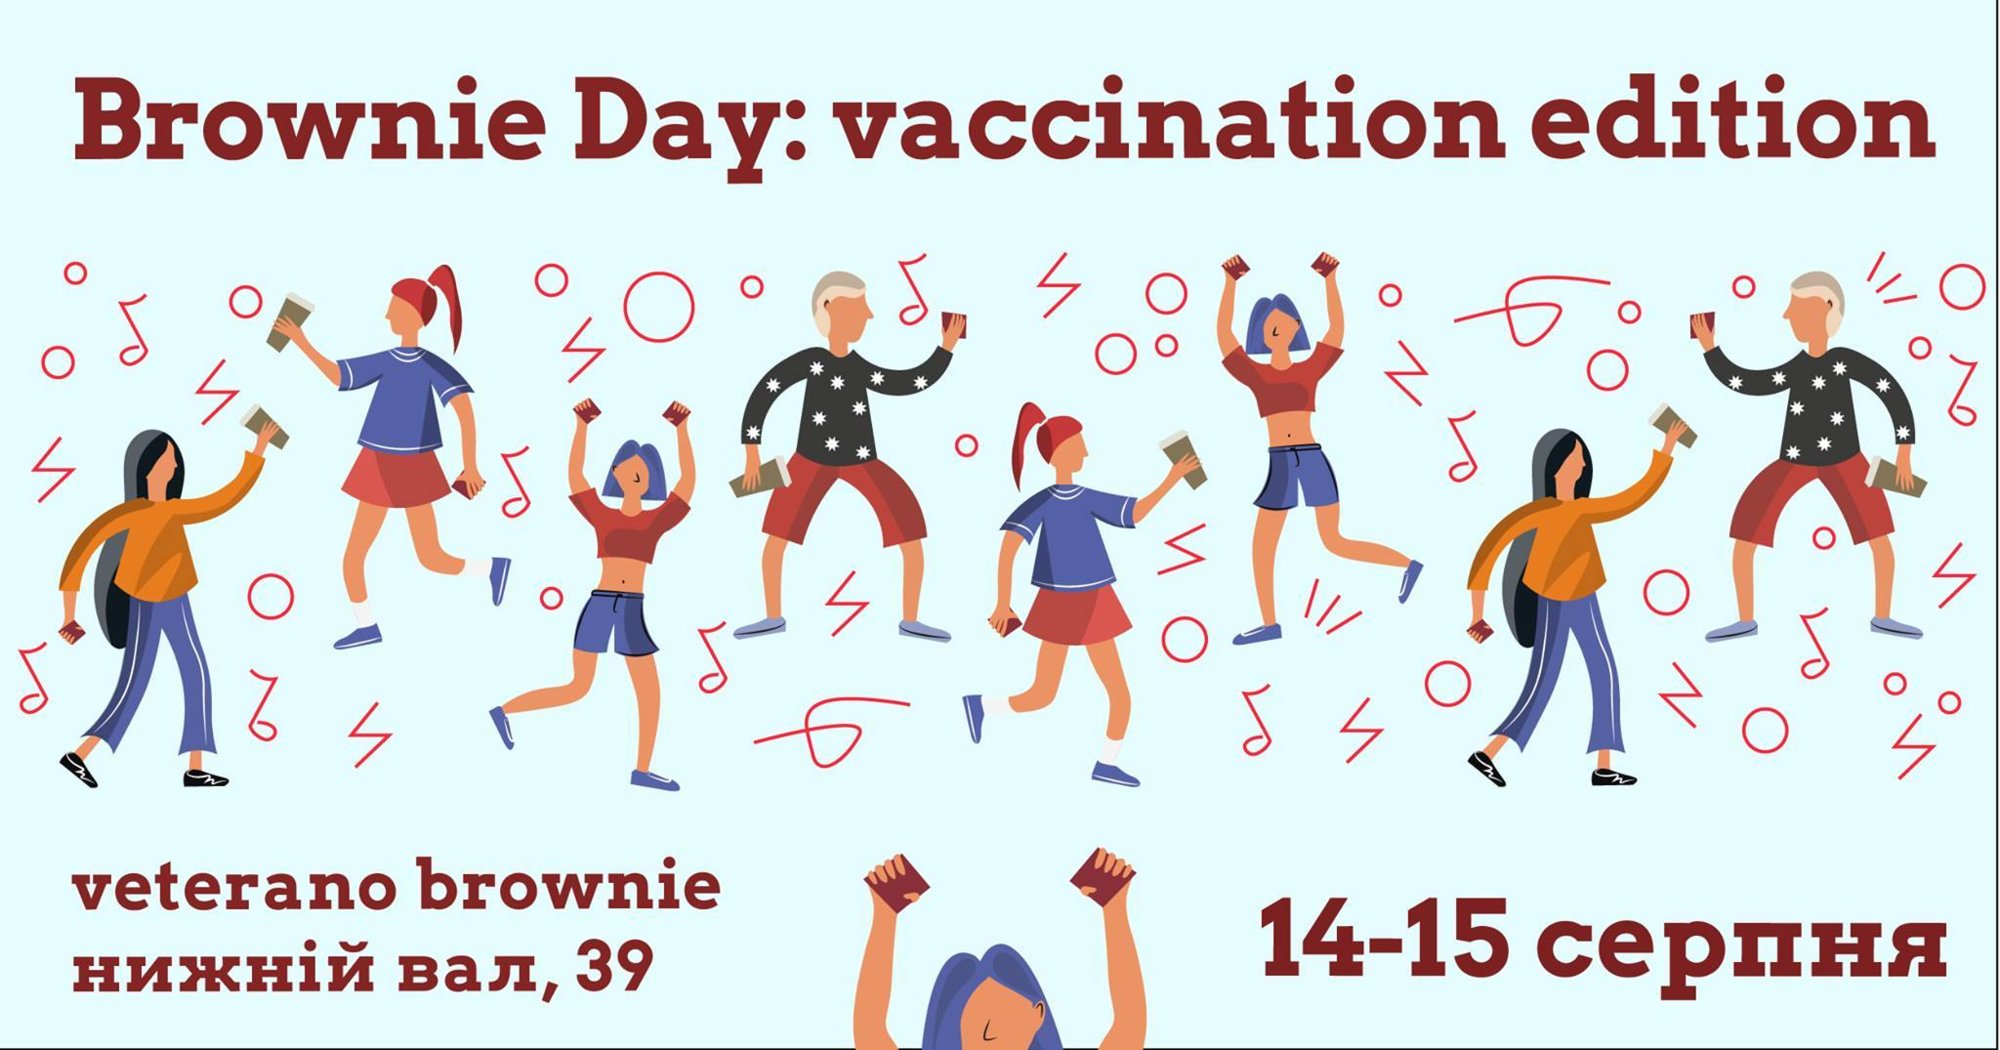 Brownie Day 2021: vaccination edition